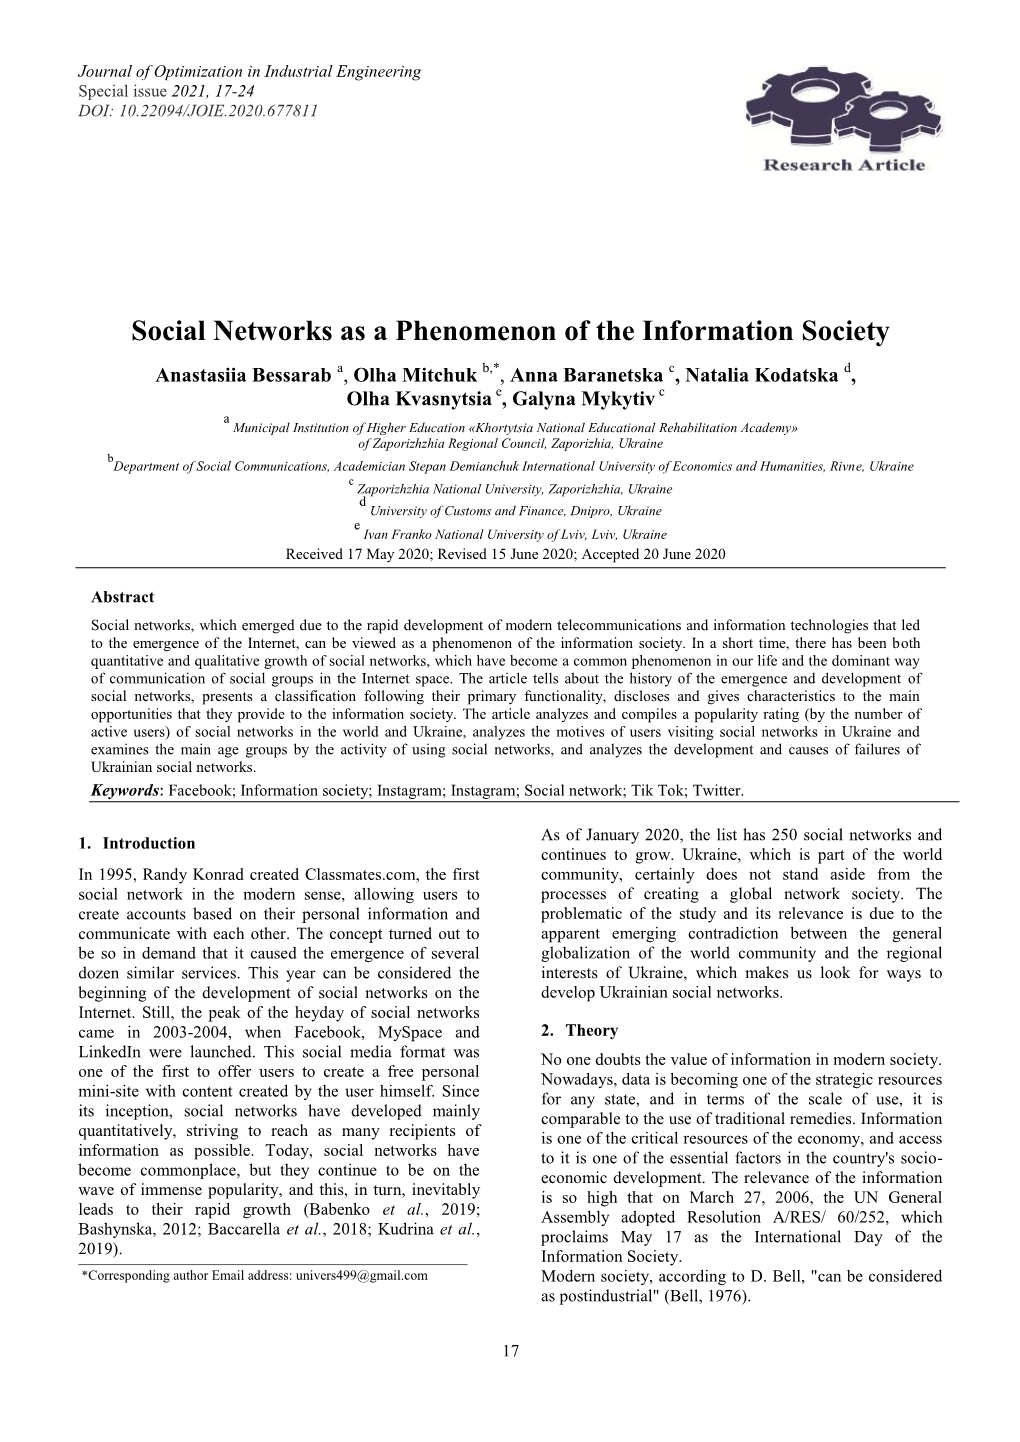 Social Networks As a Phenomenon of the Information Society